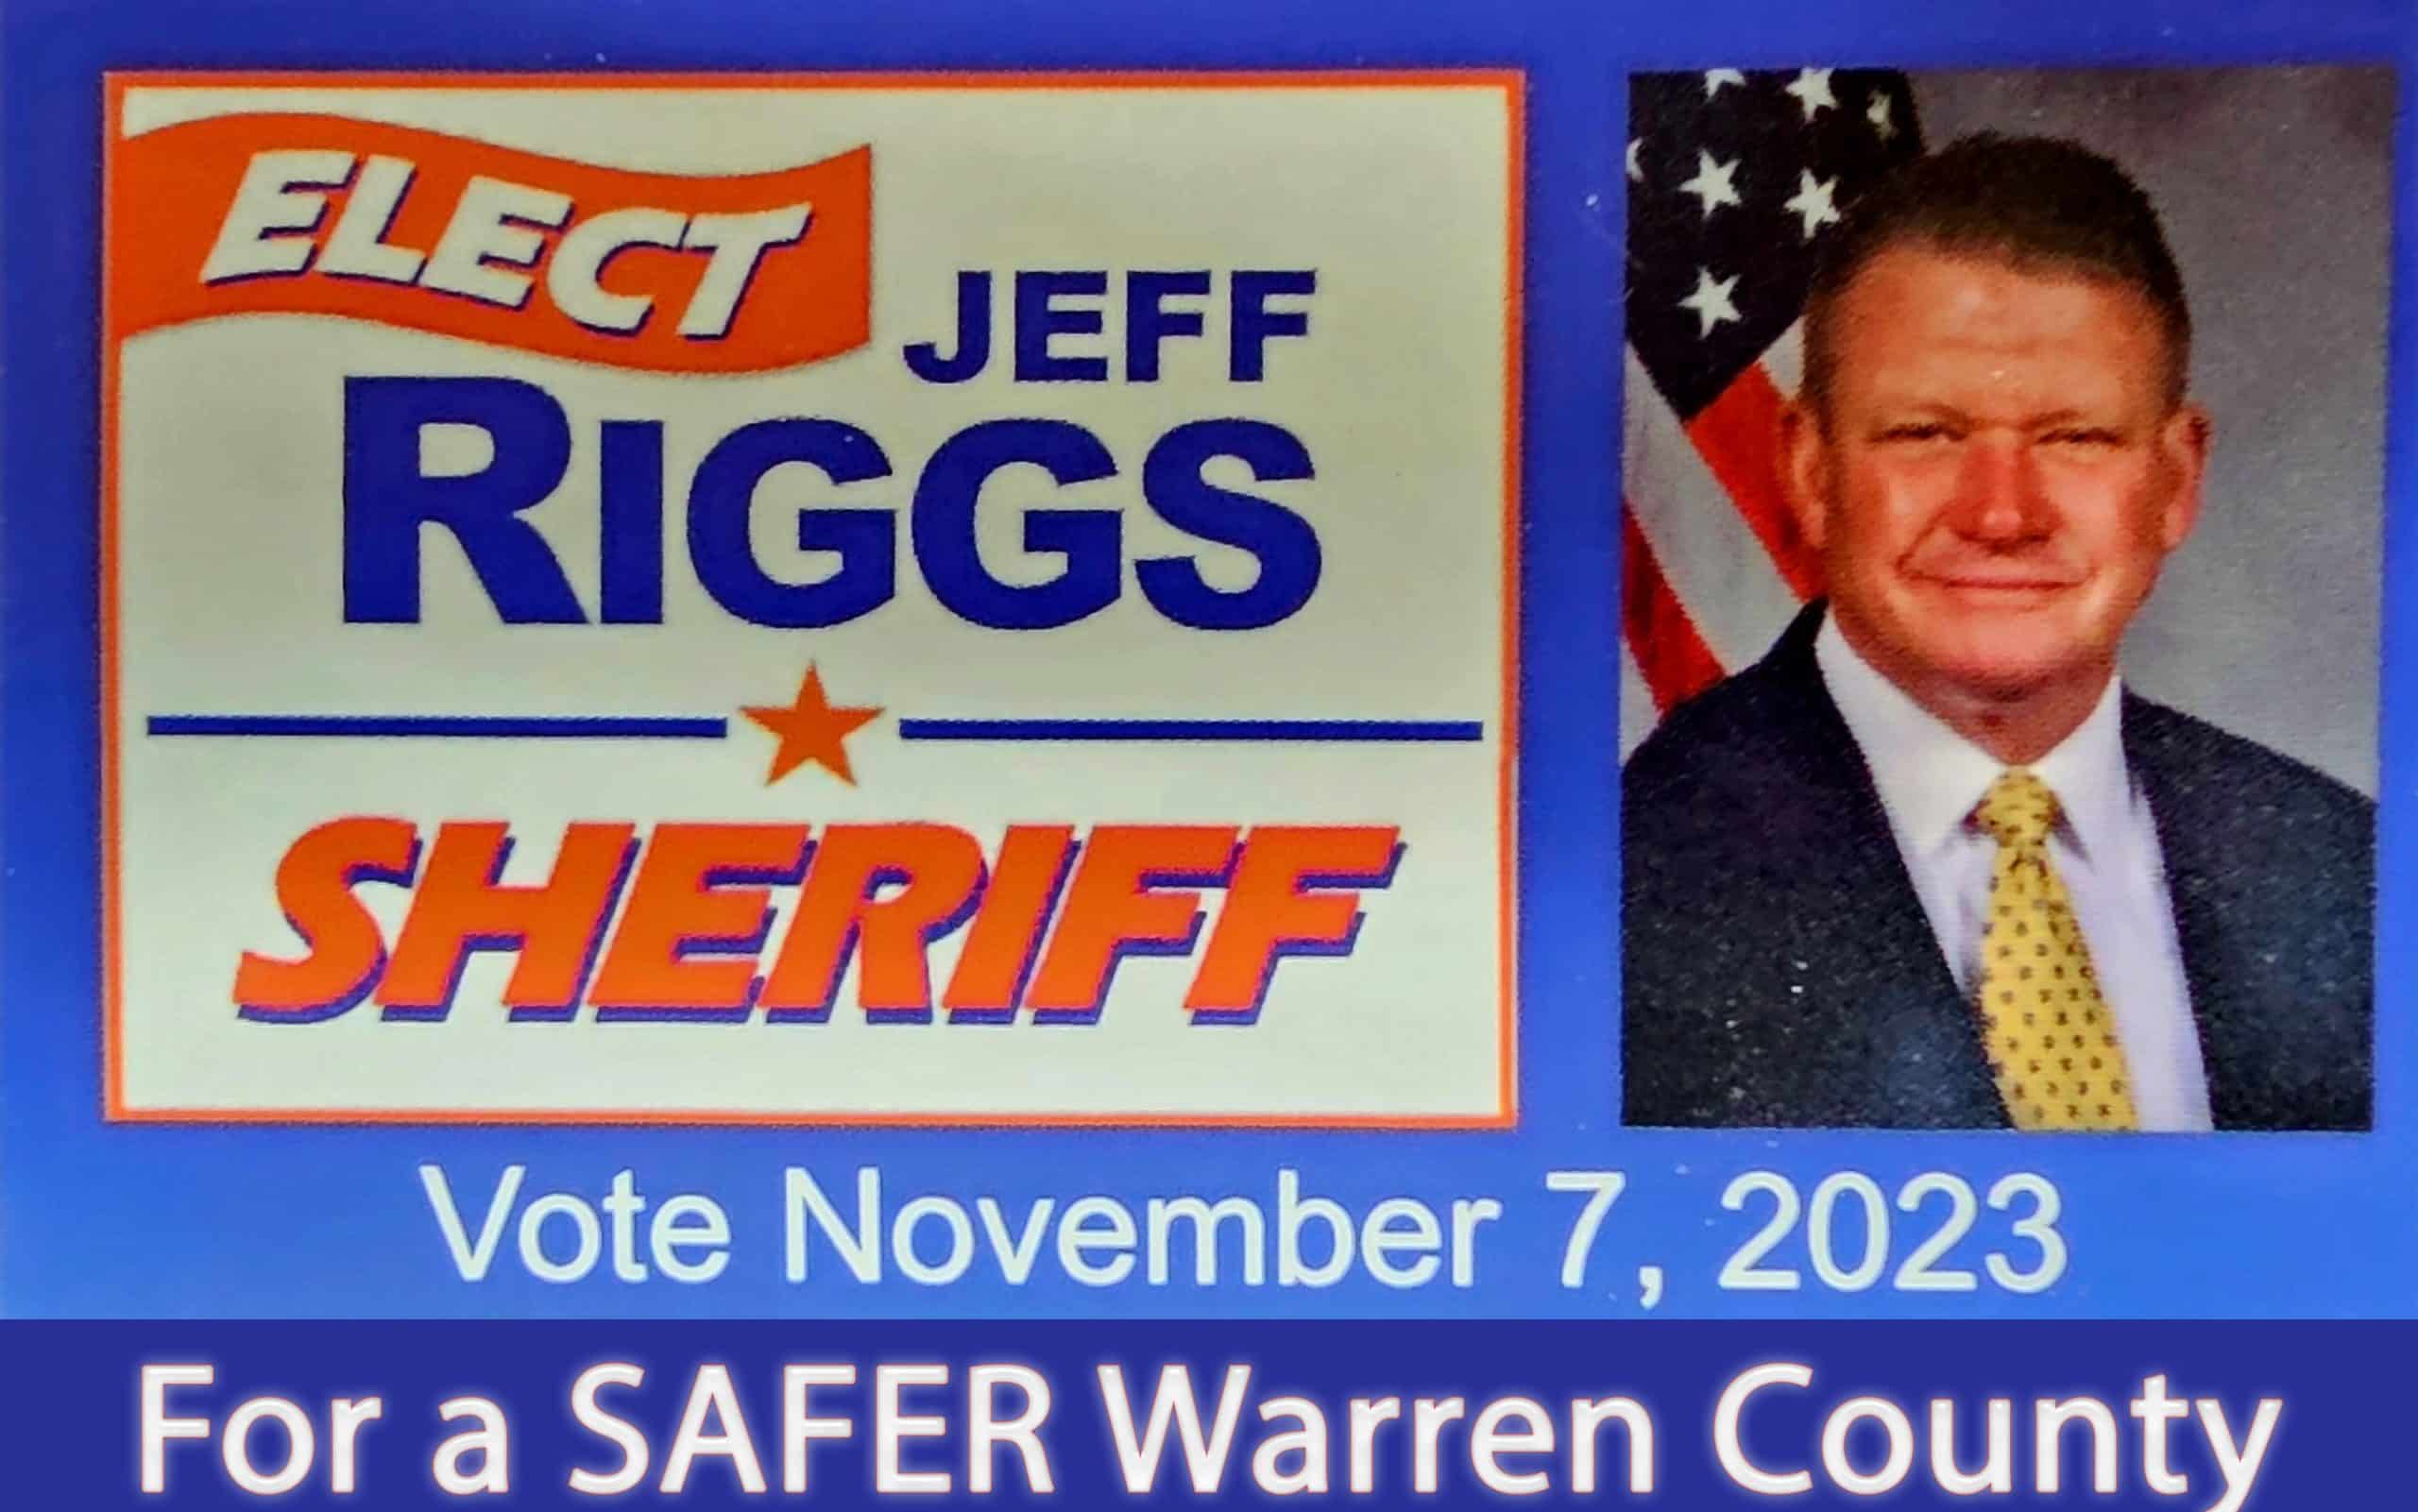 Vote Jeff Riggs for Sheriff of Warren County, for a SAFER Warren County